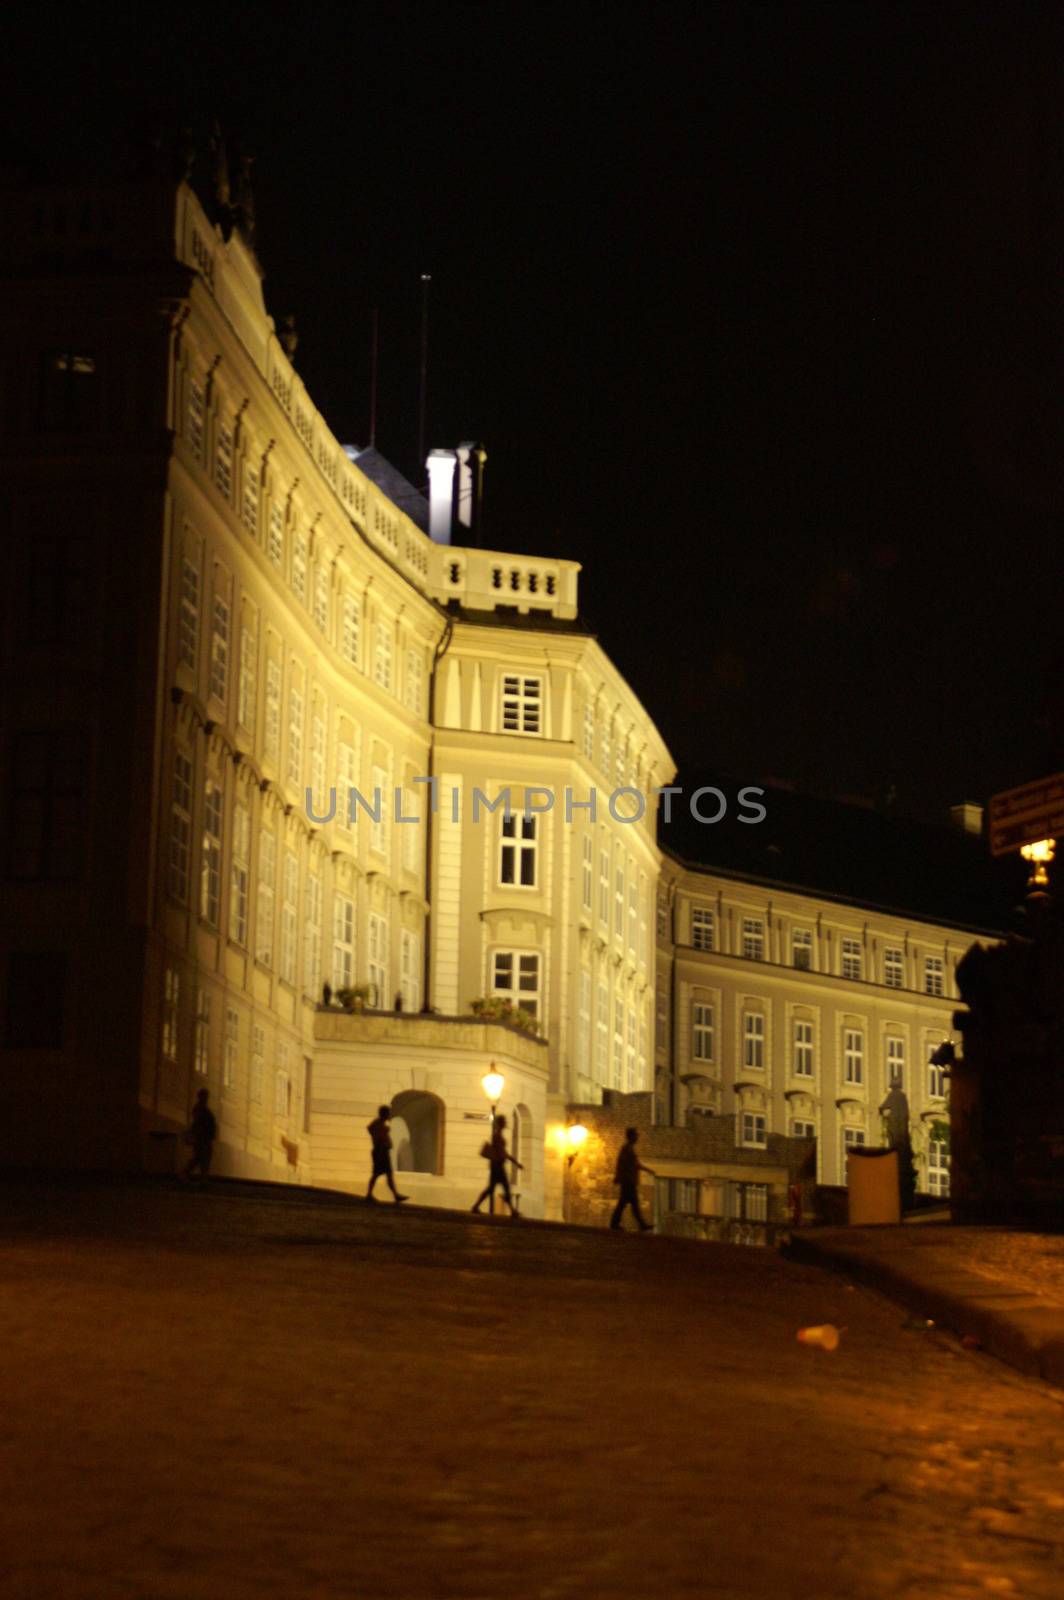 Prague president palace at night - mysterious scene in old prague city